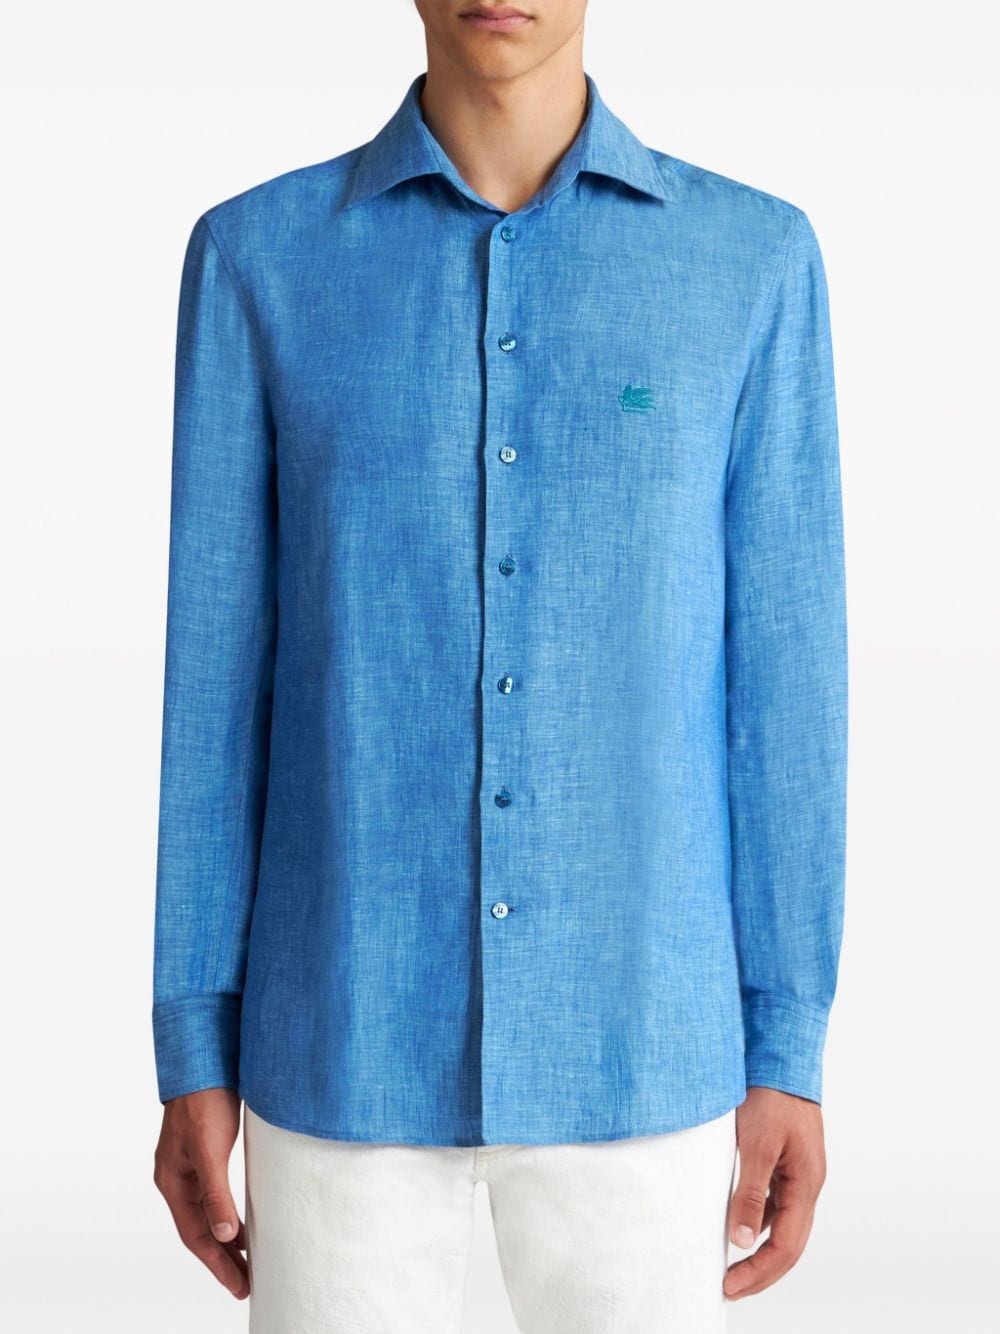 Pegaso-embroidered linen shirt<BR/><BR/>